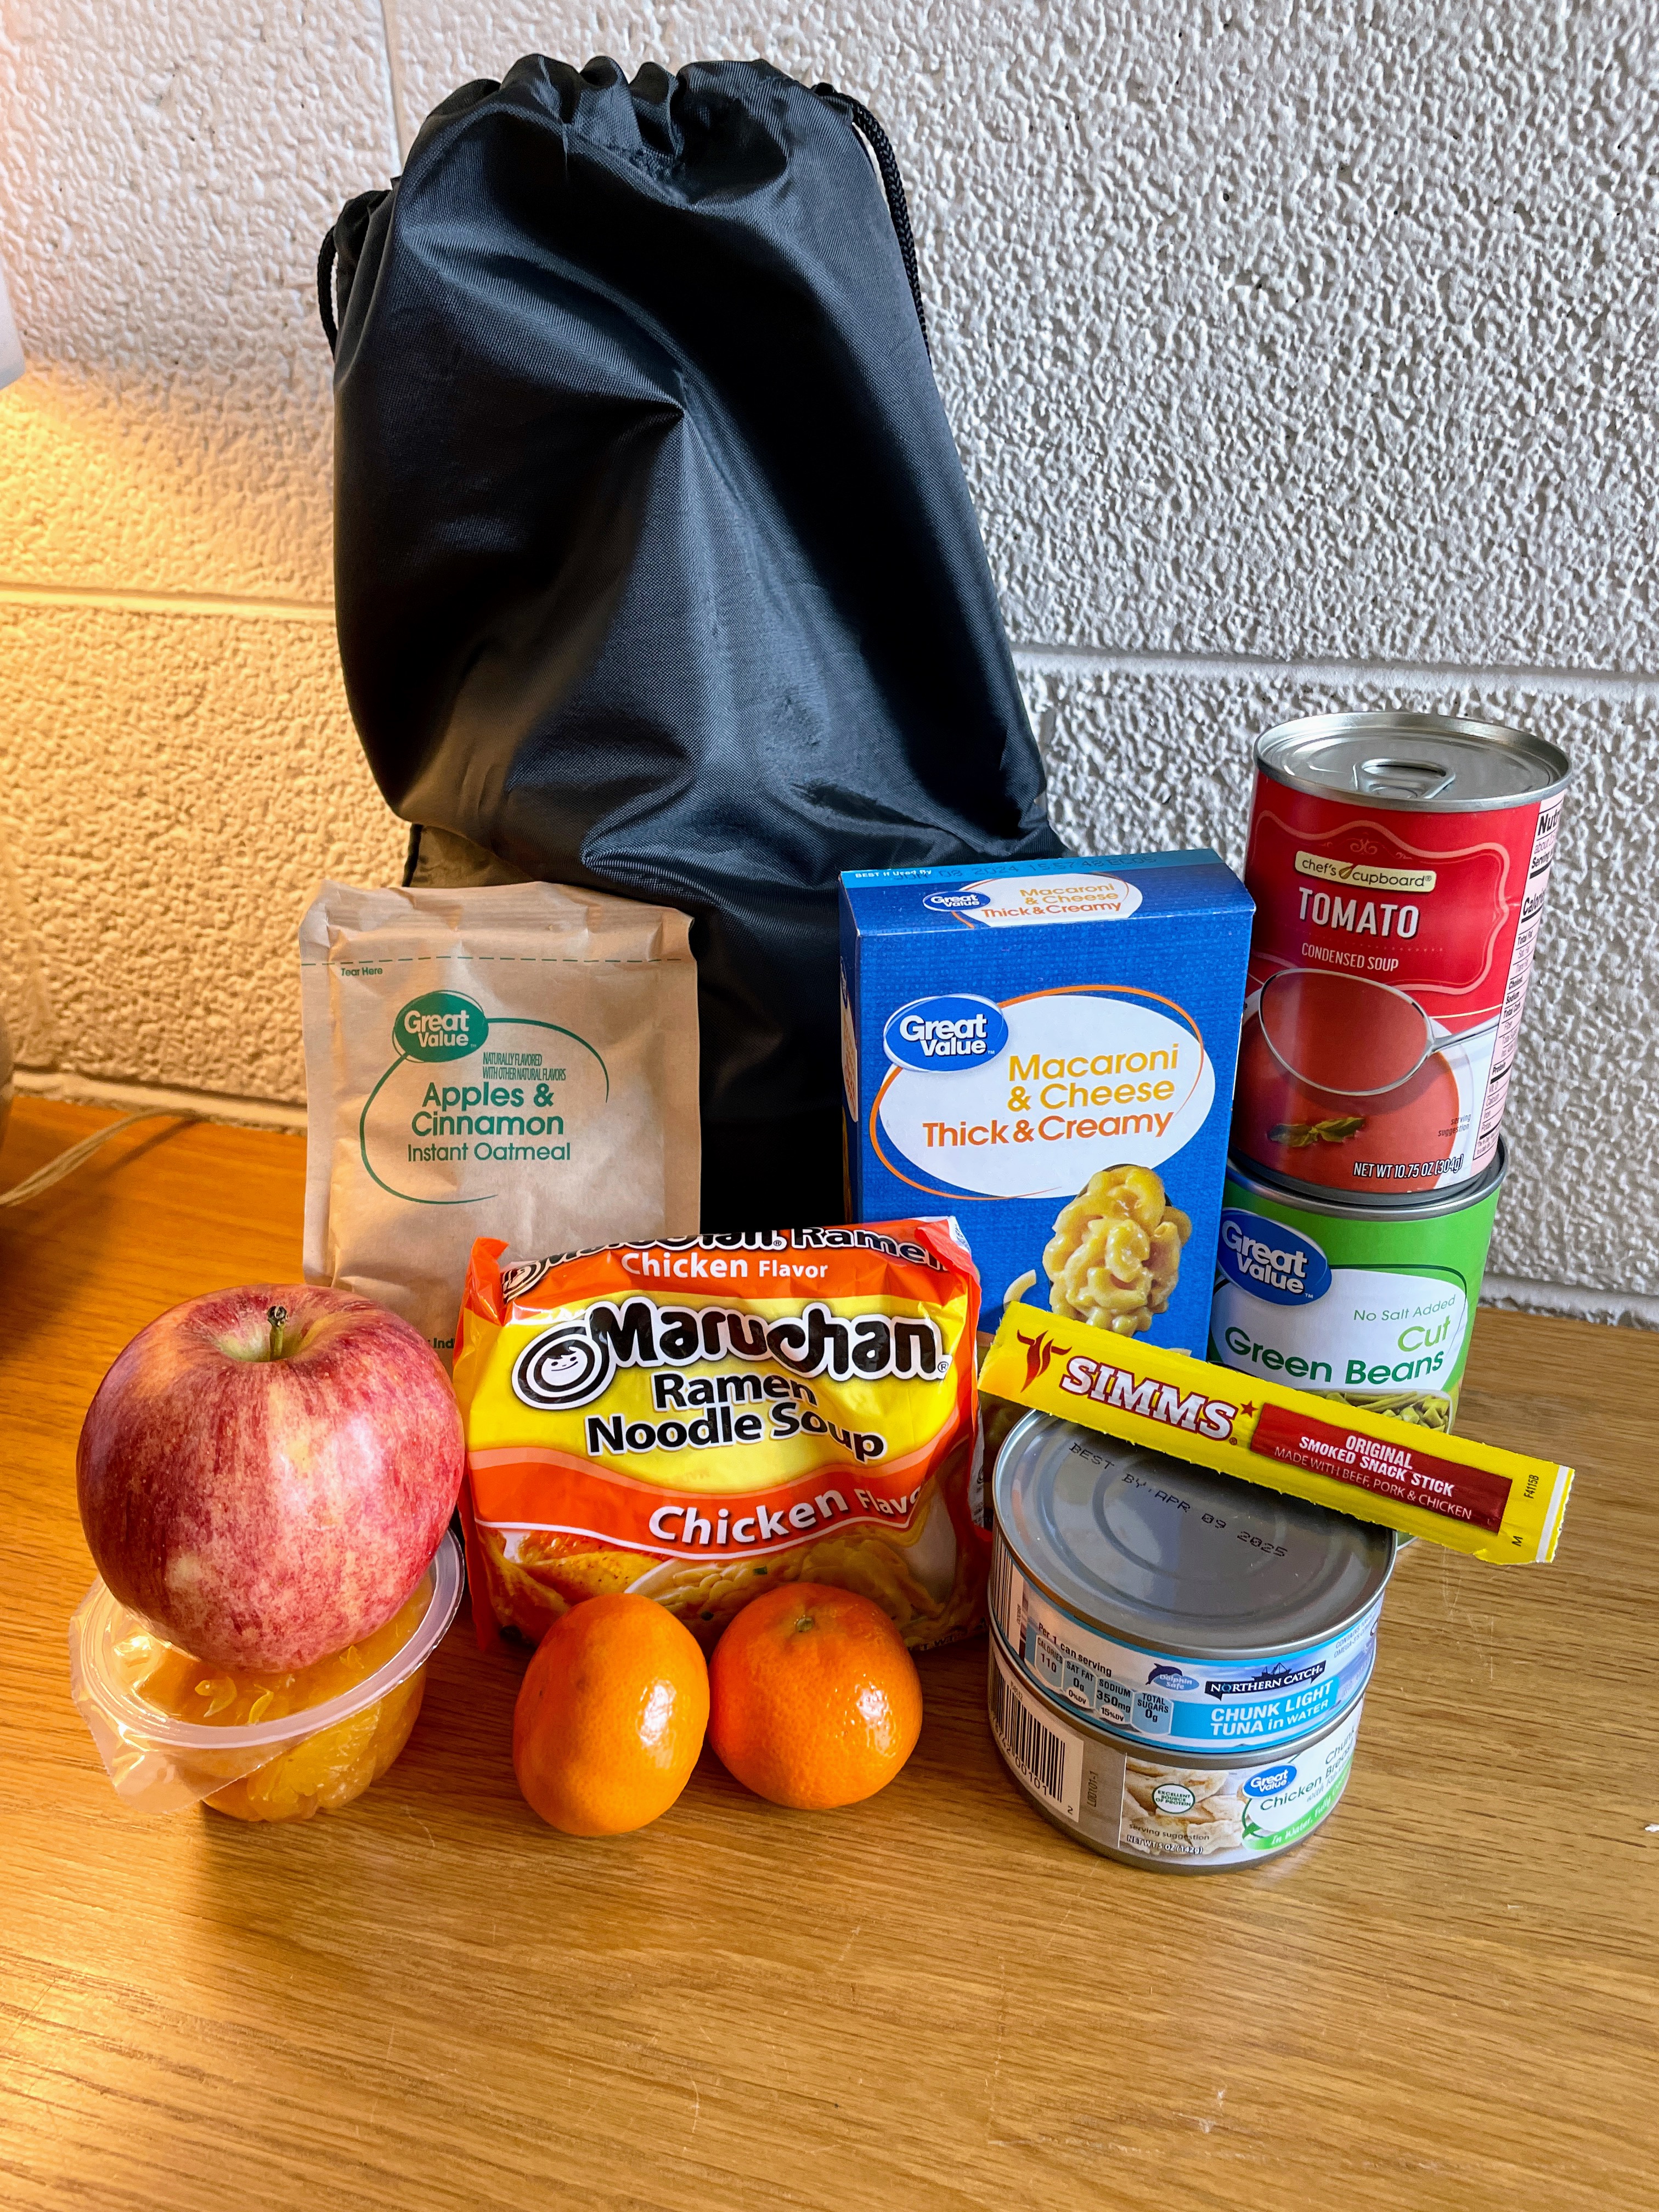 Sample of food items in some schools’ weekly backpack programs with apples, ramen, and canned goods